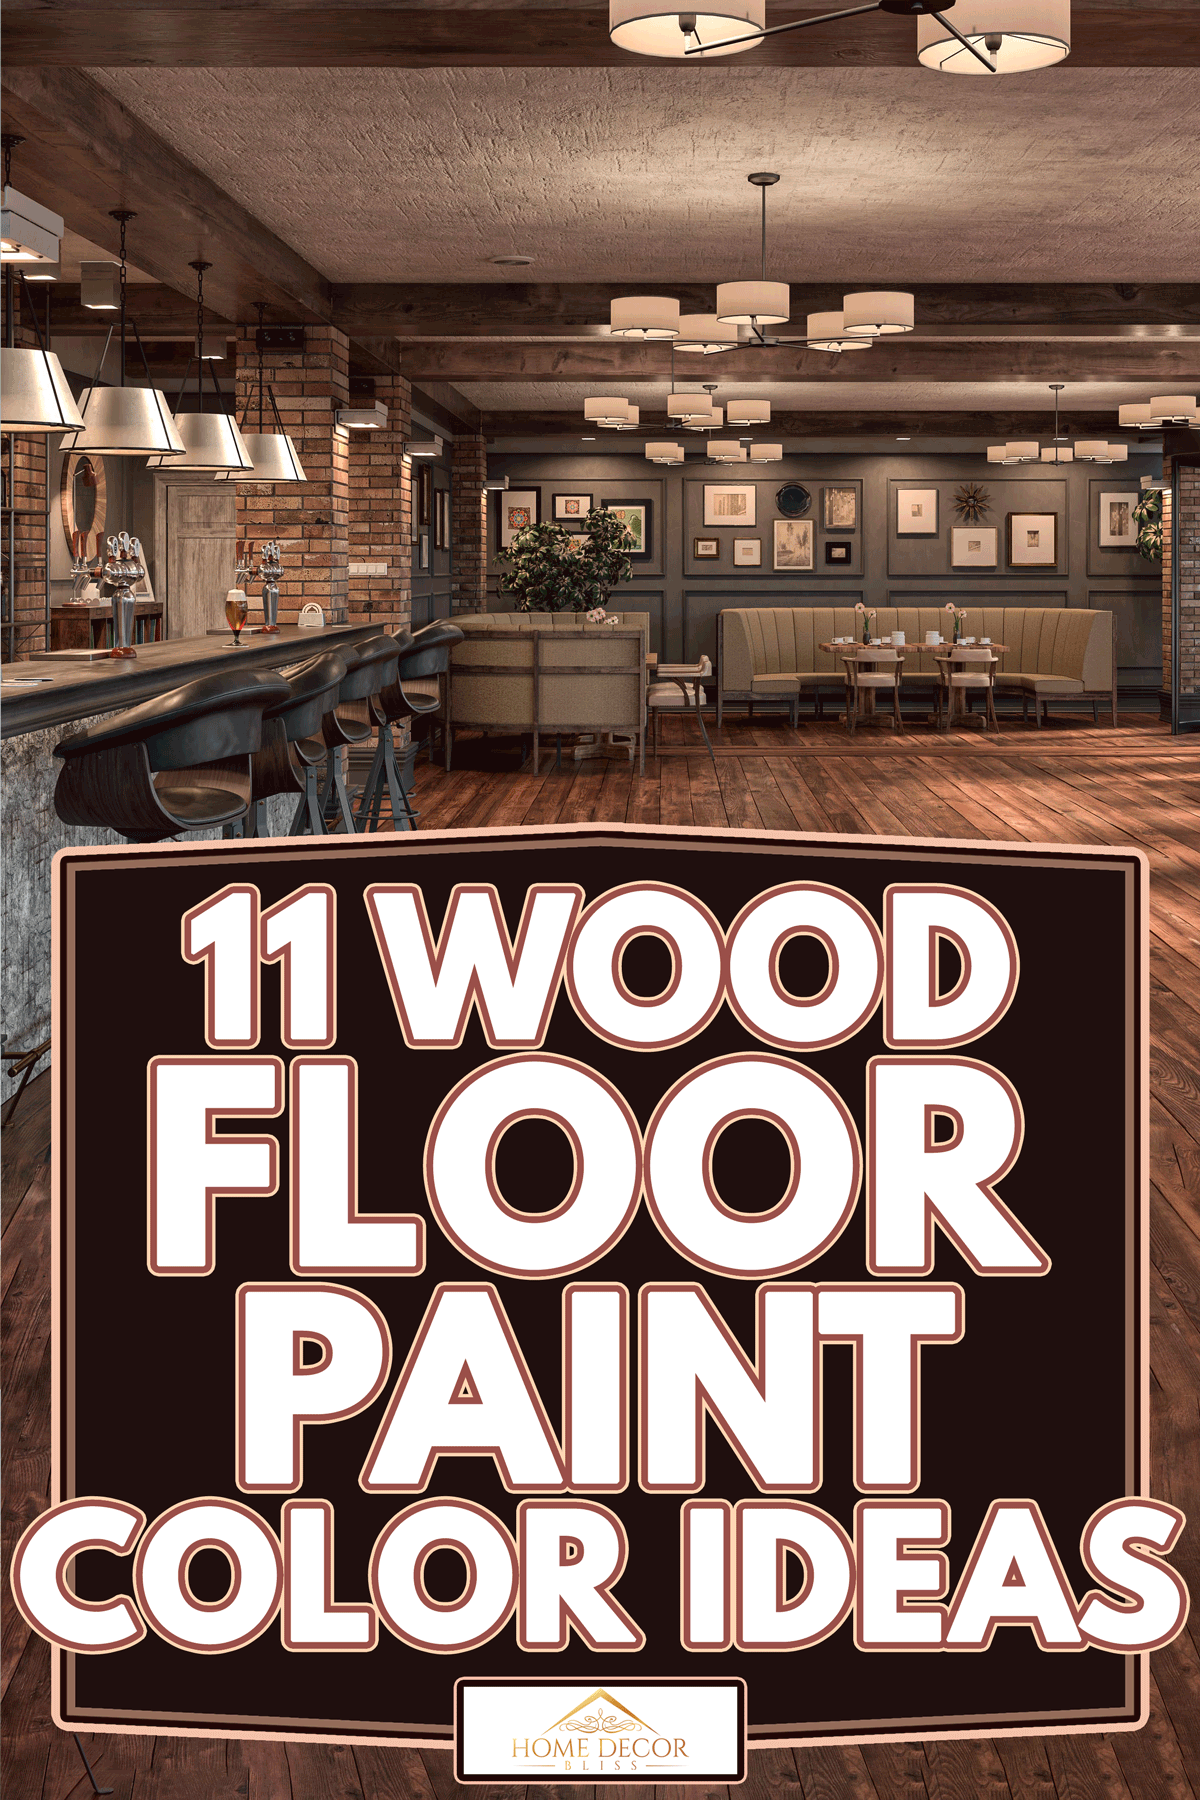 An empty large retro restaurant bar with lounge corners, 11 Wood Floor Paint Color Ideas